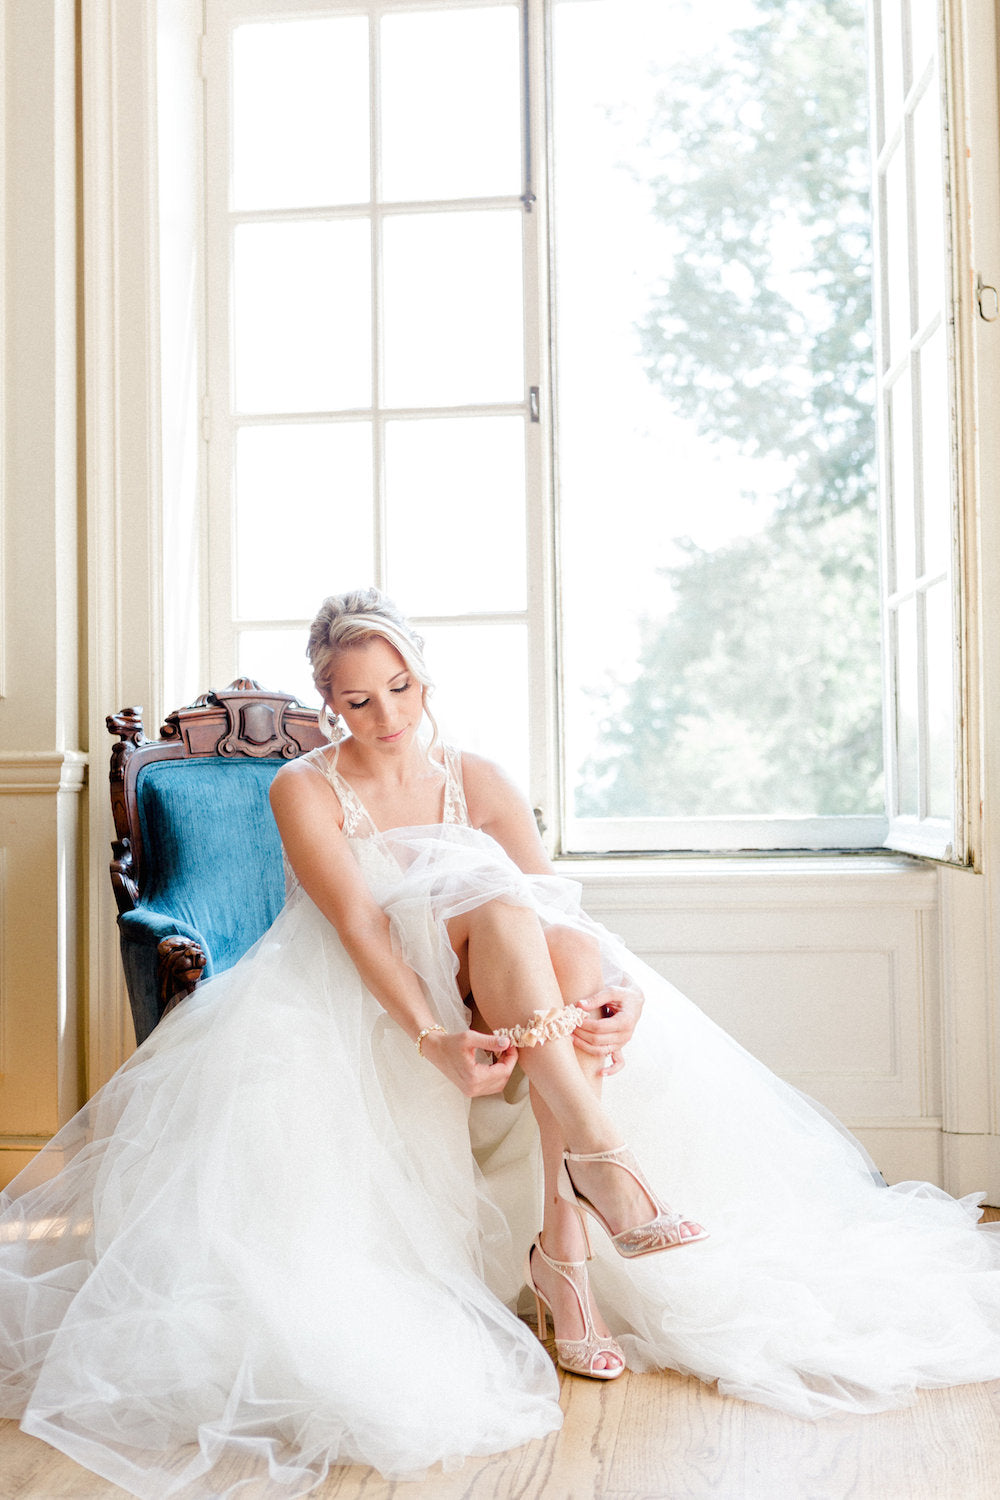 bride putting on garter - tips about trying wedding dresses on at home from The Garter Girl